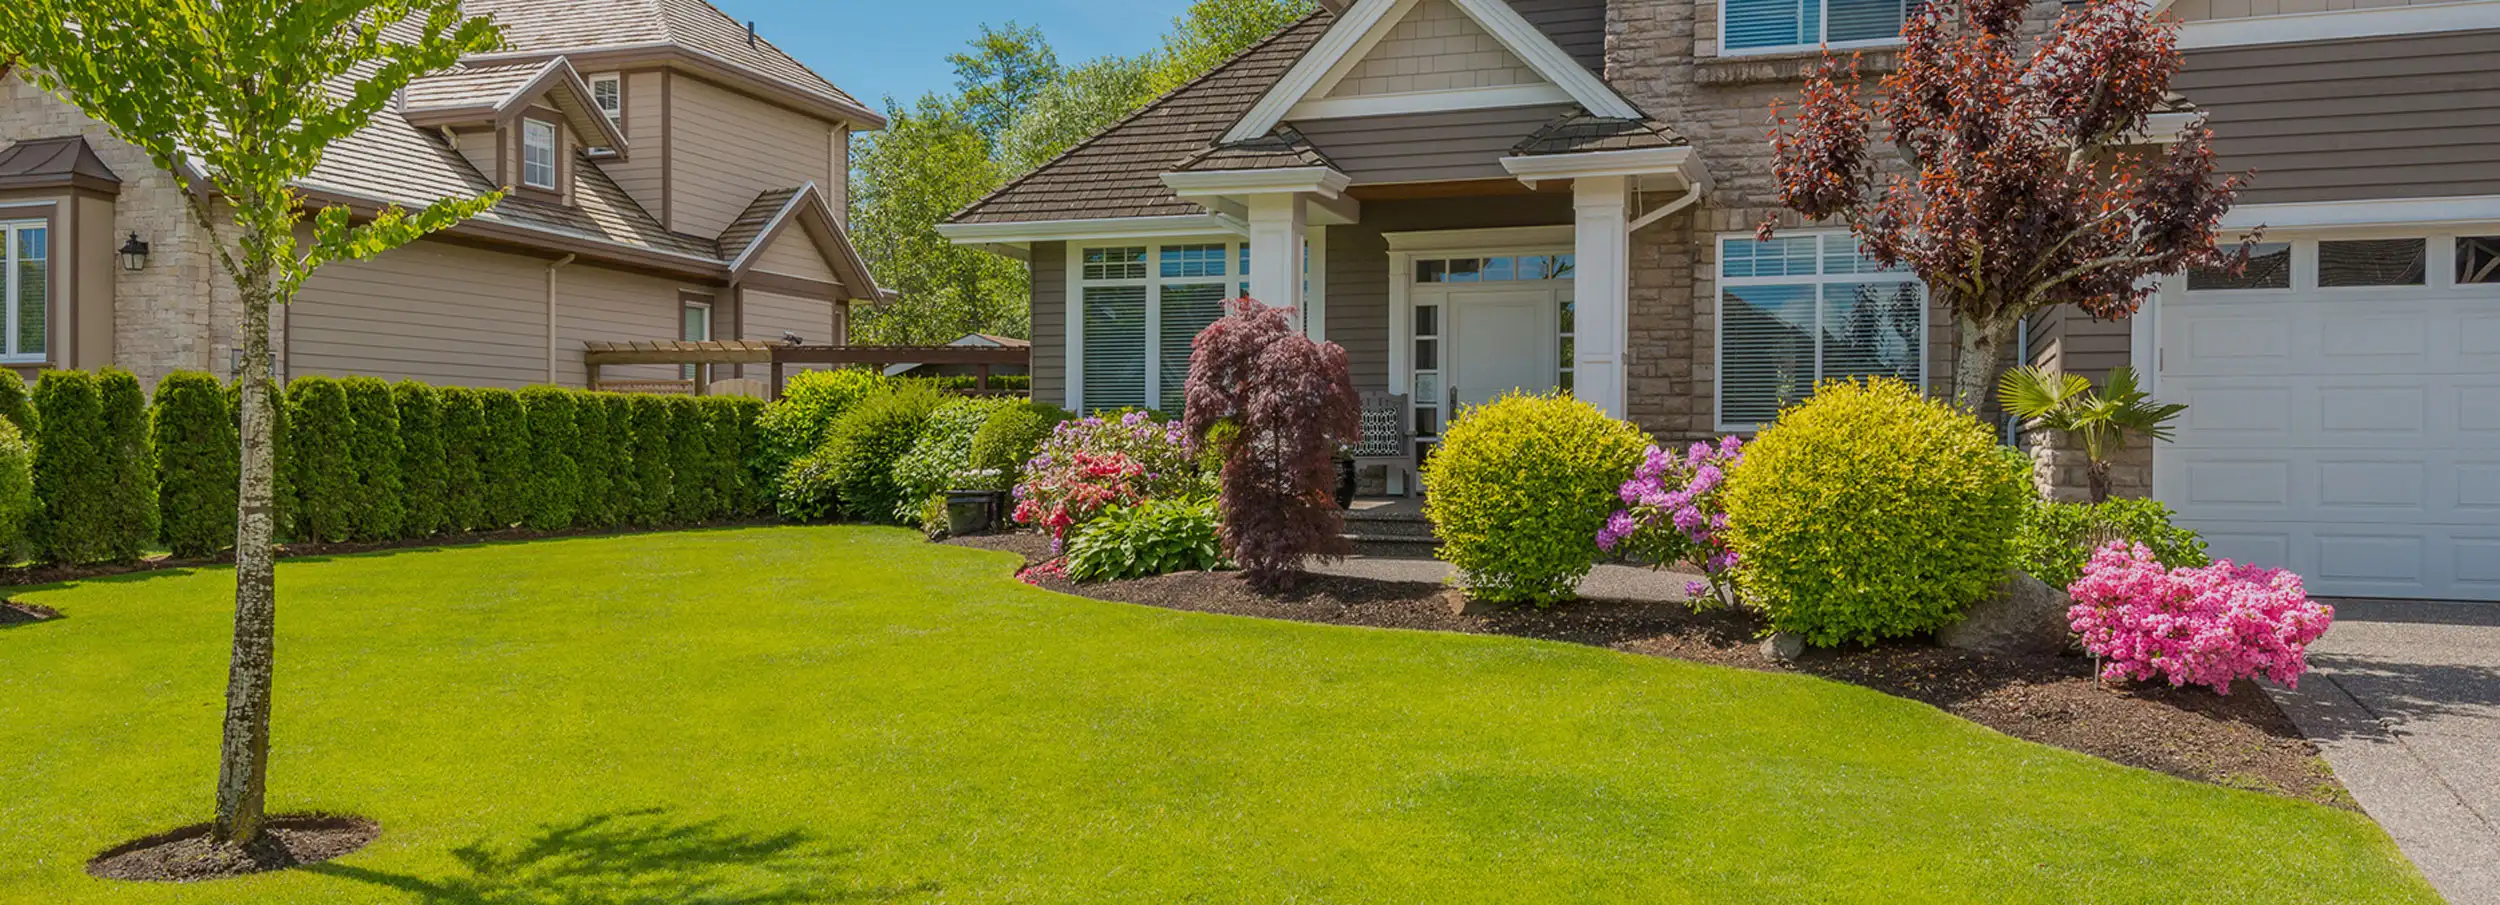 Home with landscaping grounds guys header.